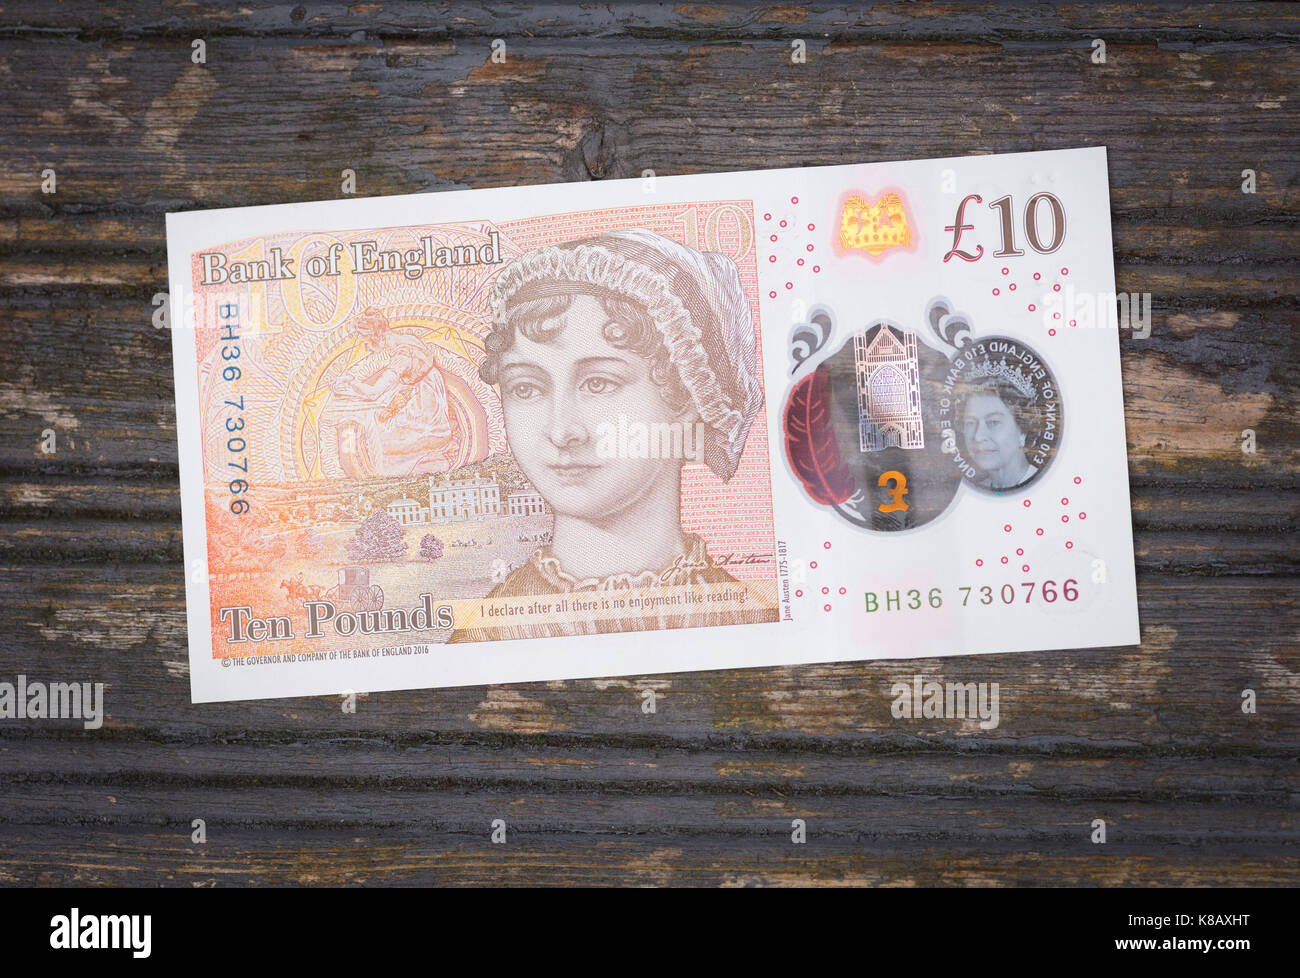 New Plastic Ten Pound Note, Went into circulation on 14th September 2017. Stock Photo